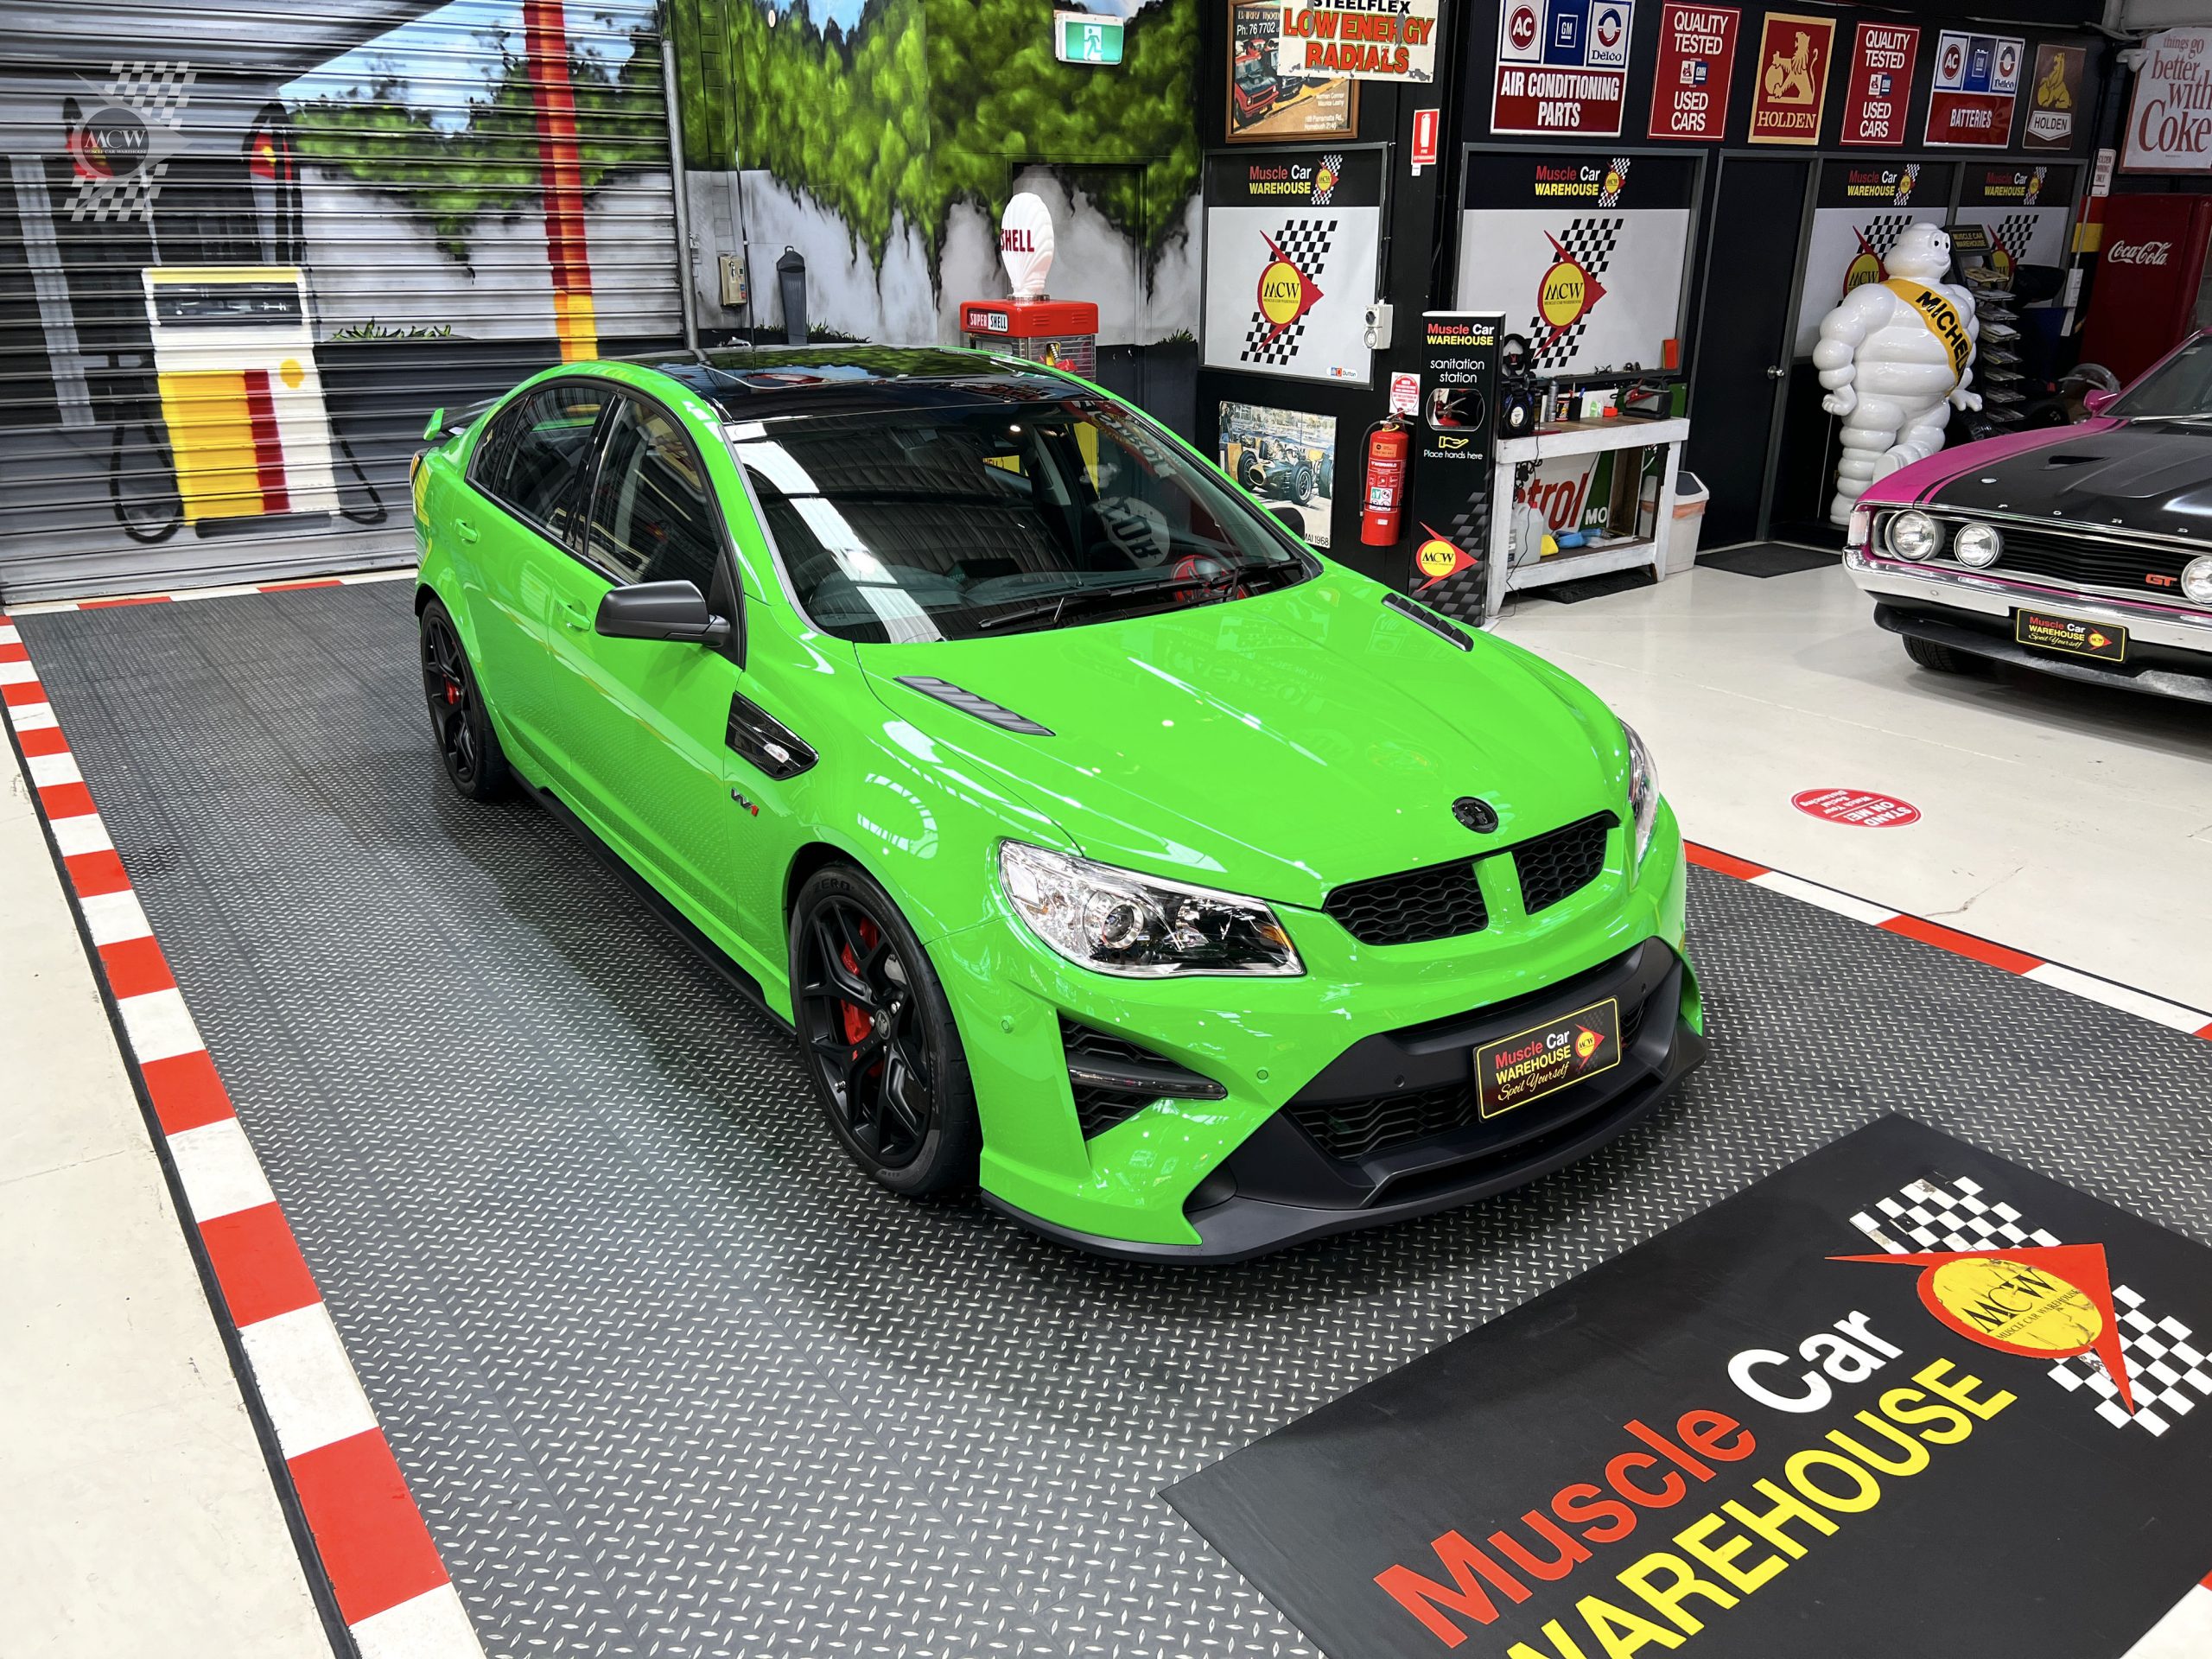 2017 Holden HSV VF GTS-R W1 - Muscle Car Warehouse